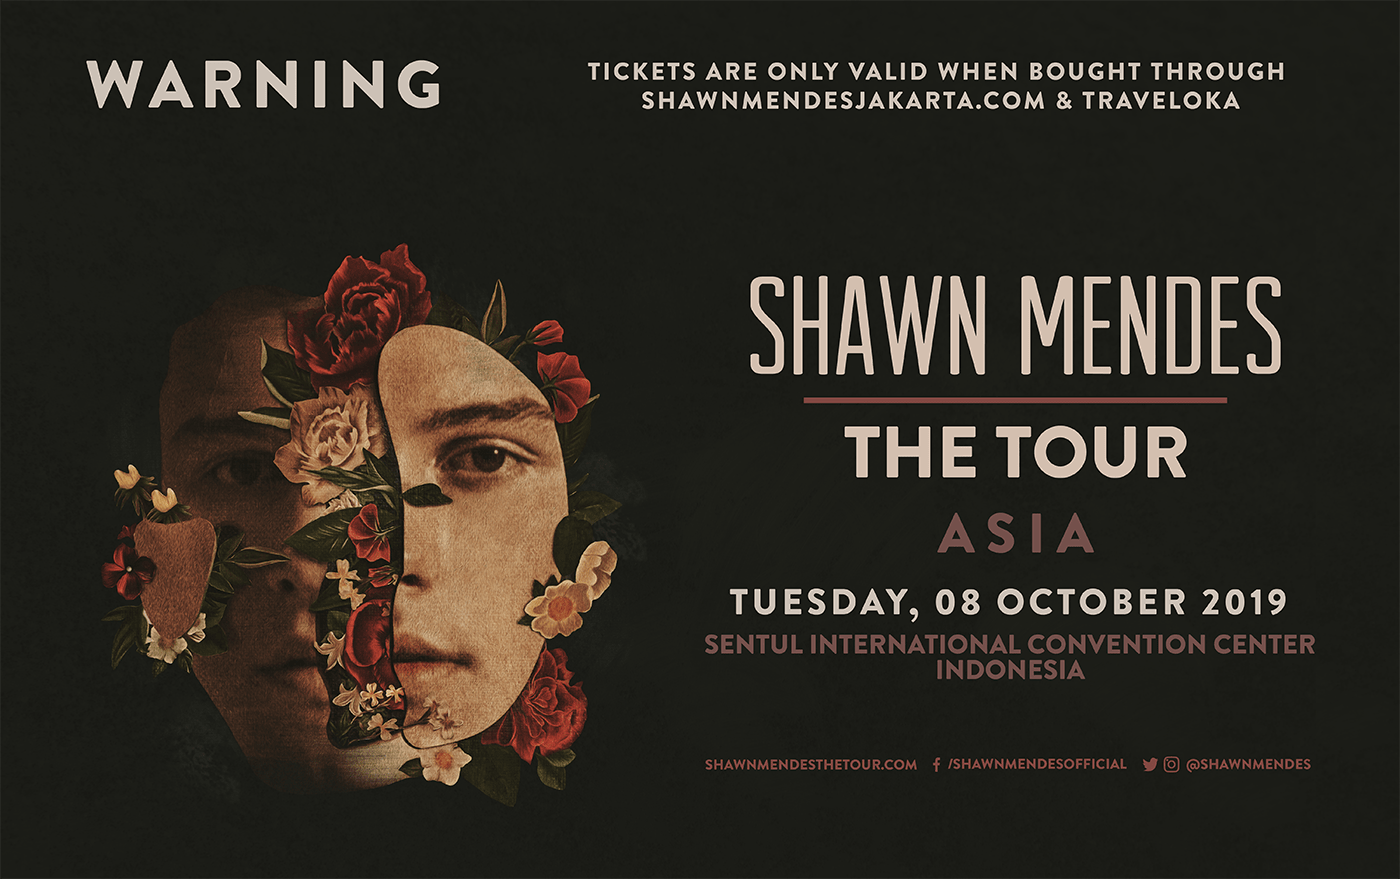 Shawn Mendes: The Tour Asia 2019